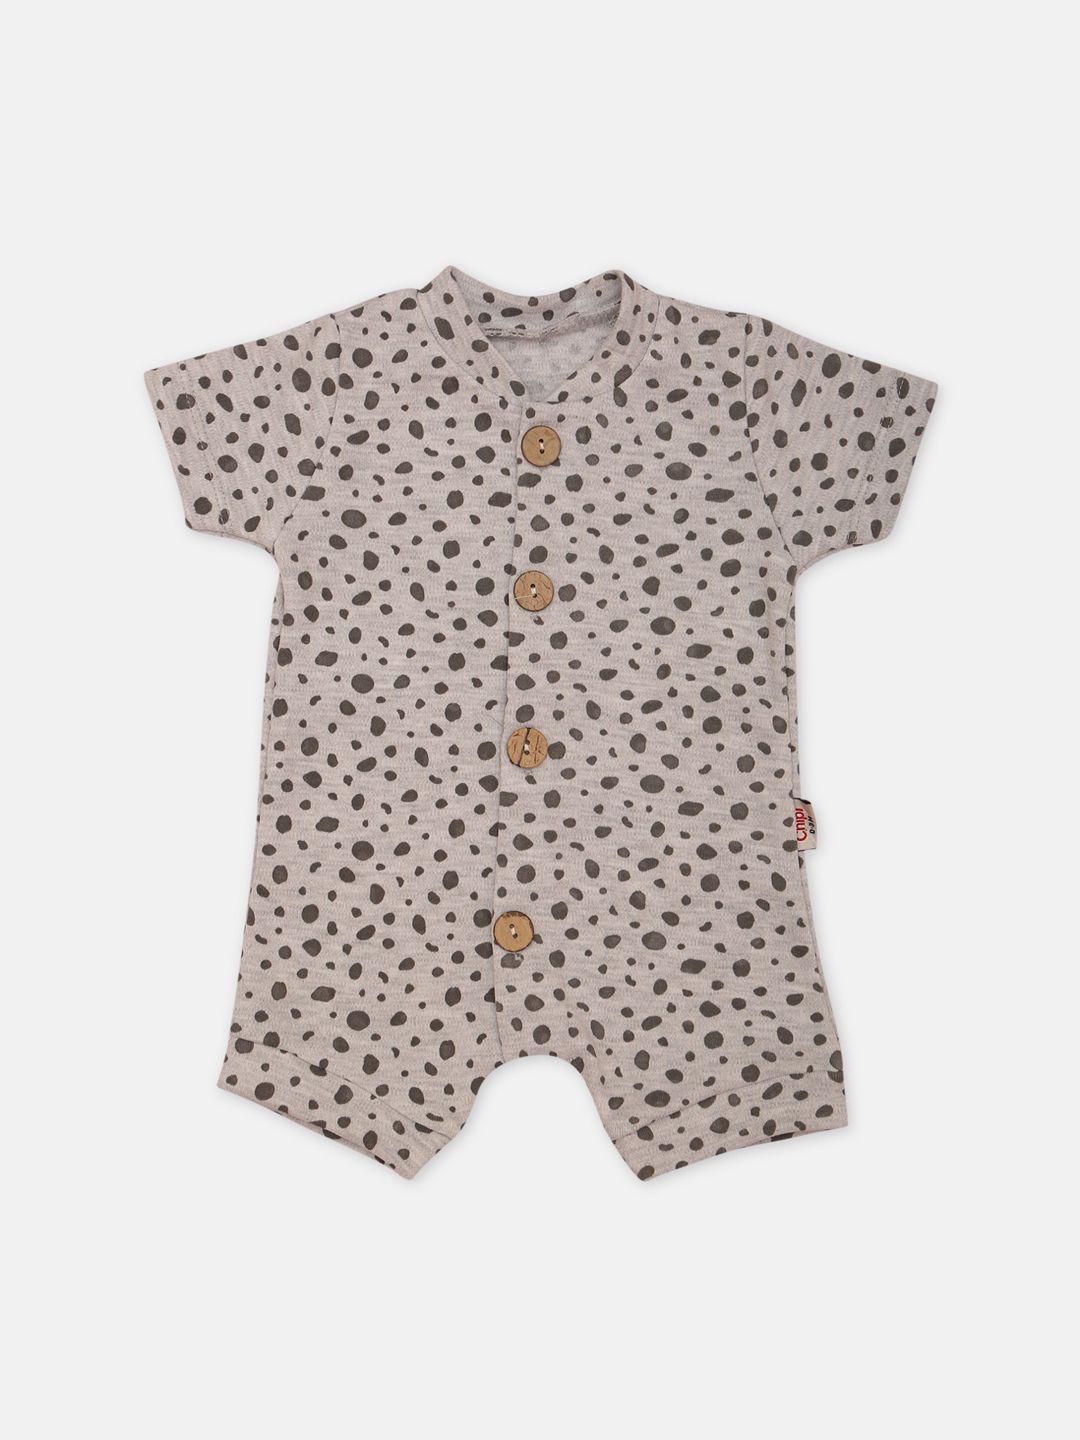 zyra kids infant boys grey & green printed rompers